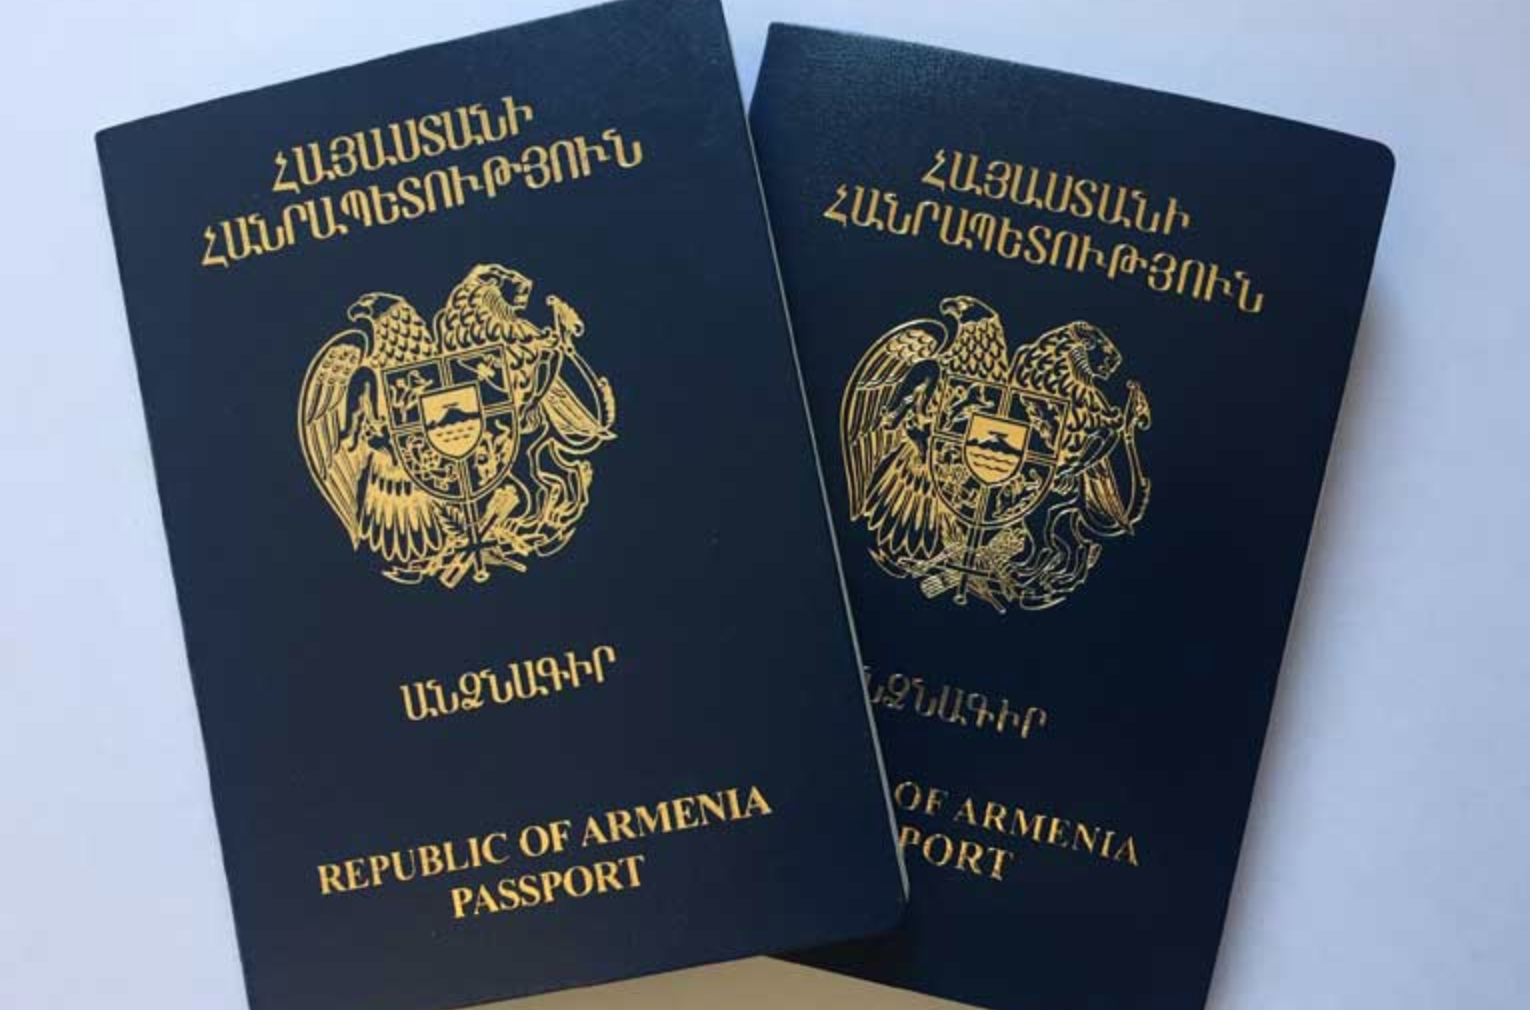 Vietnam Electronic Visa (E-Visa) is Officially Extended for Armenian up to 2021